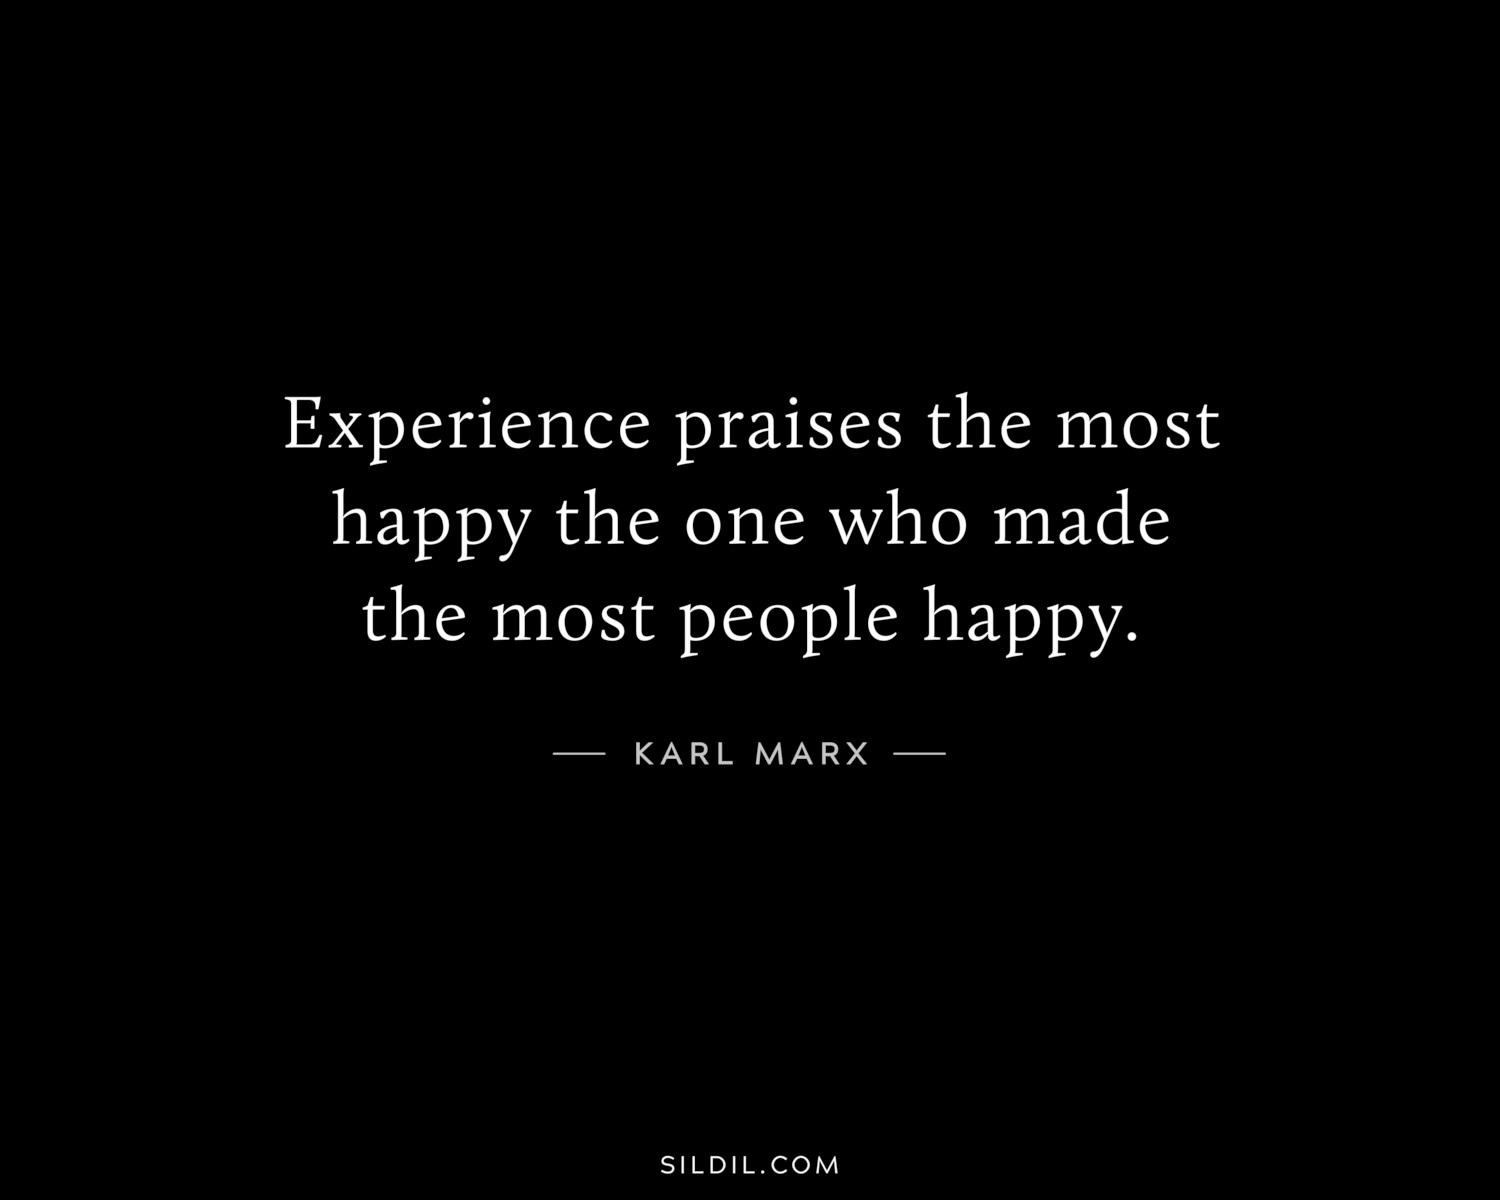 Experience praises the most happy the one who made the most people happy.